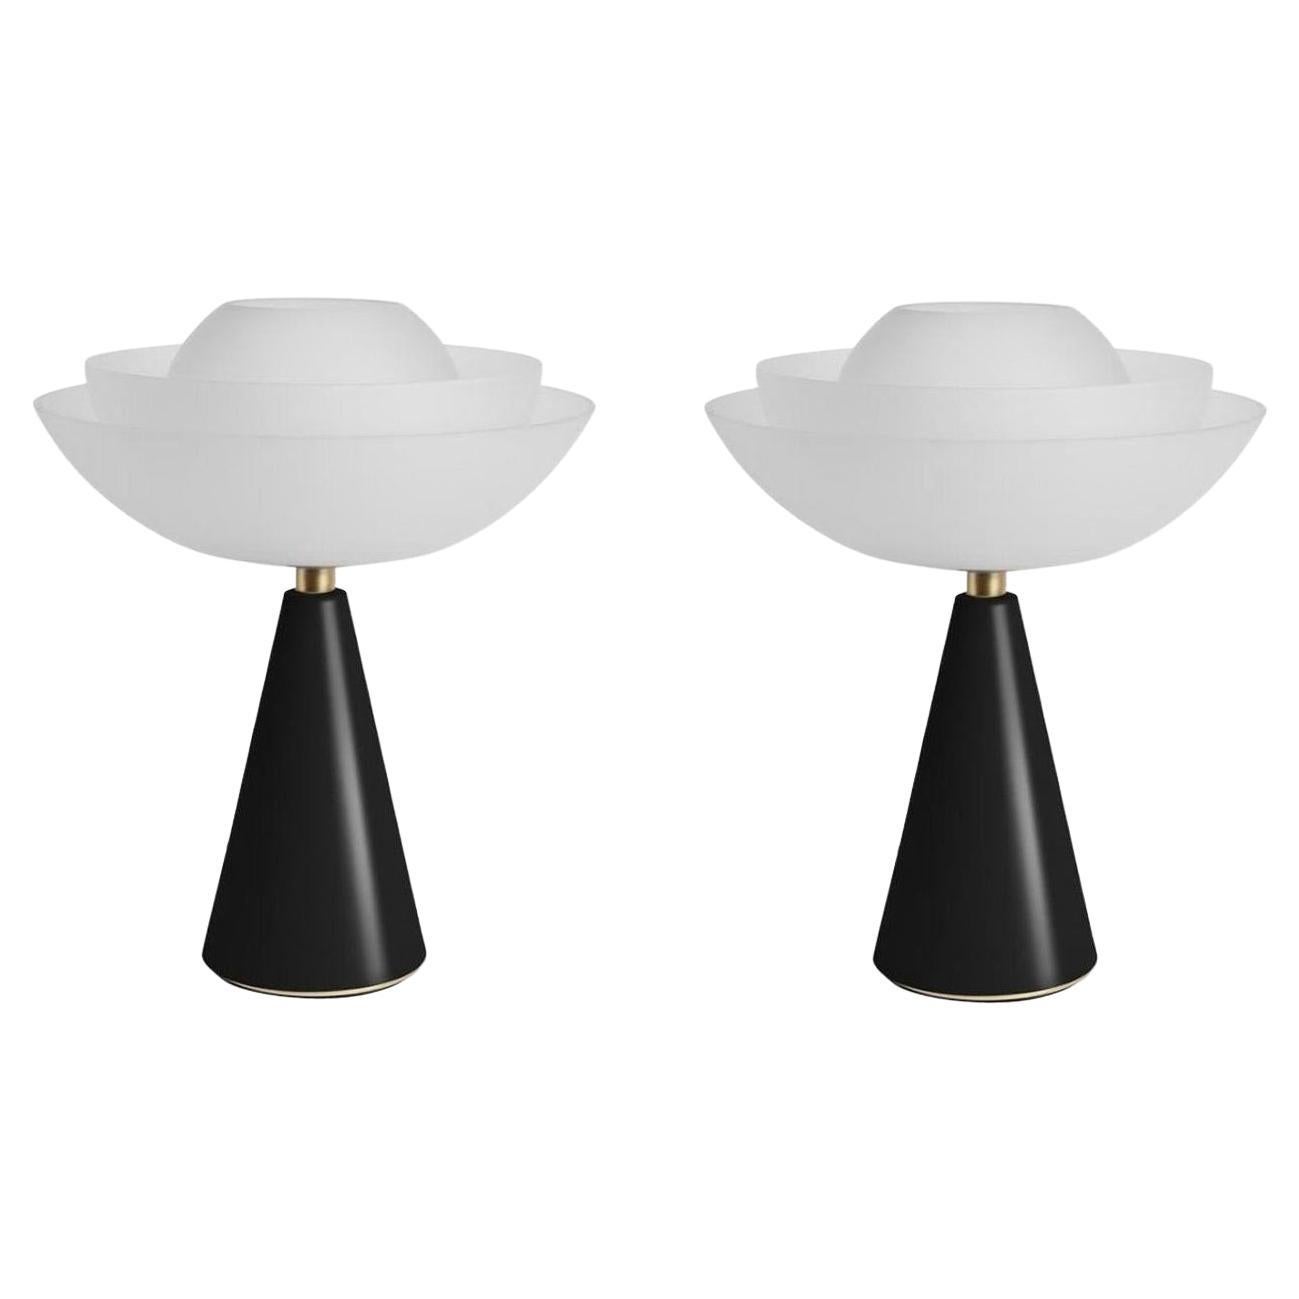 Pair of Black Lotus Table Lamps by Mason Editions For Sale